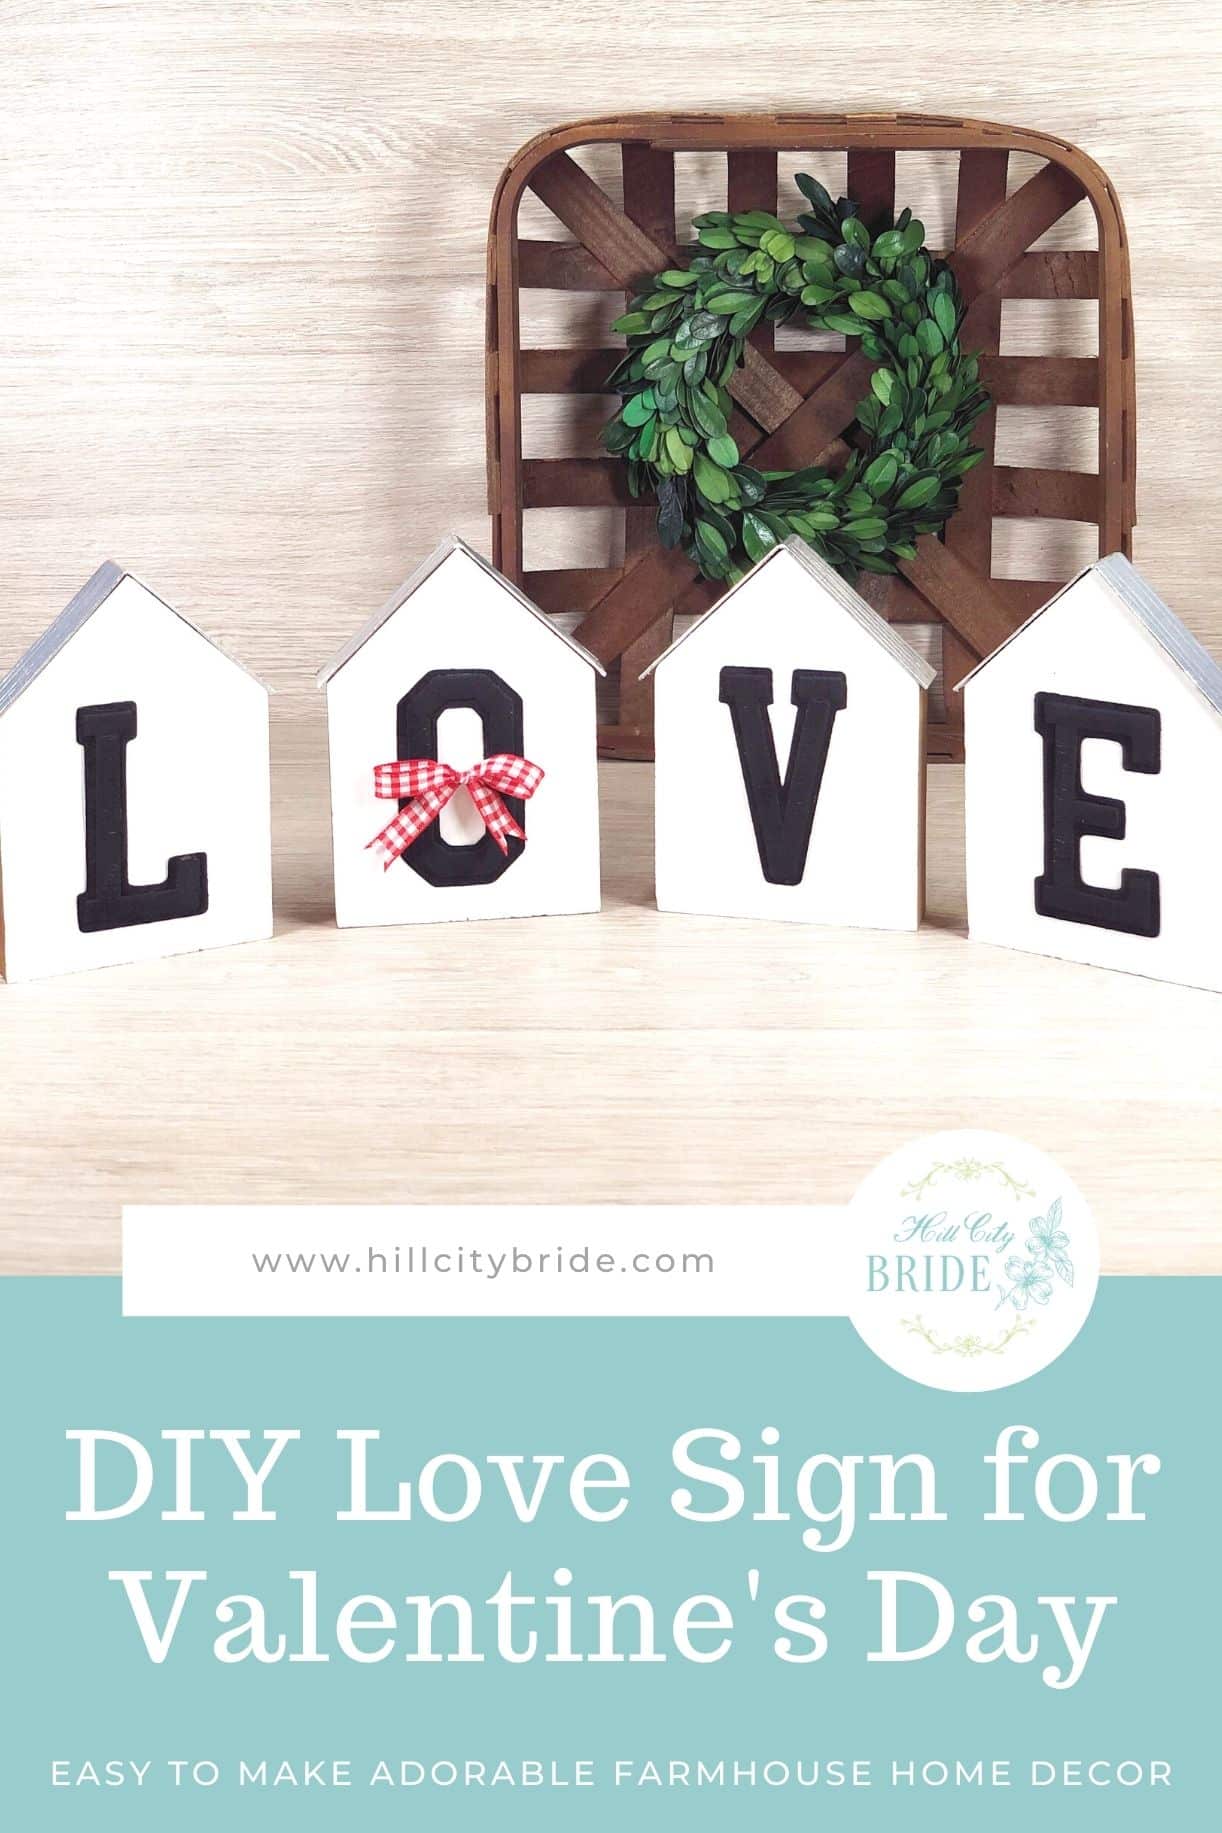 Valentine's Day gifts DIY project